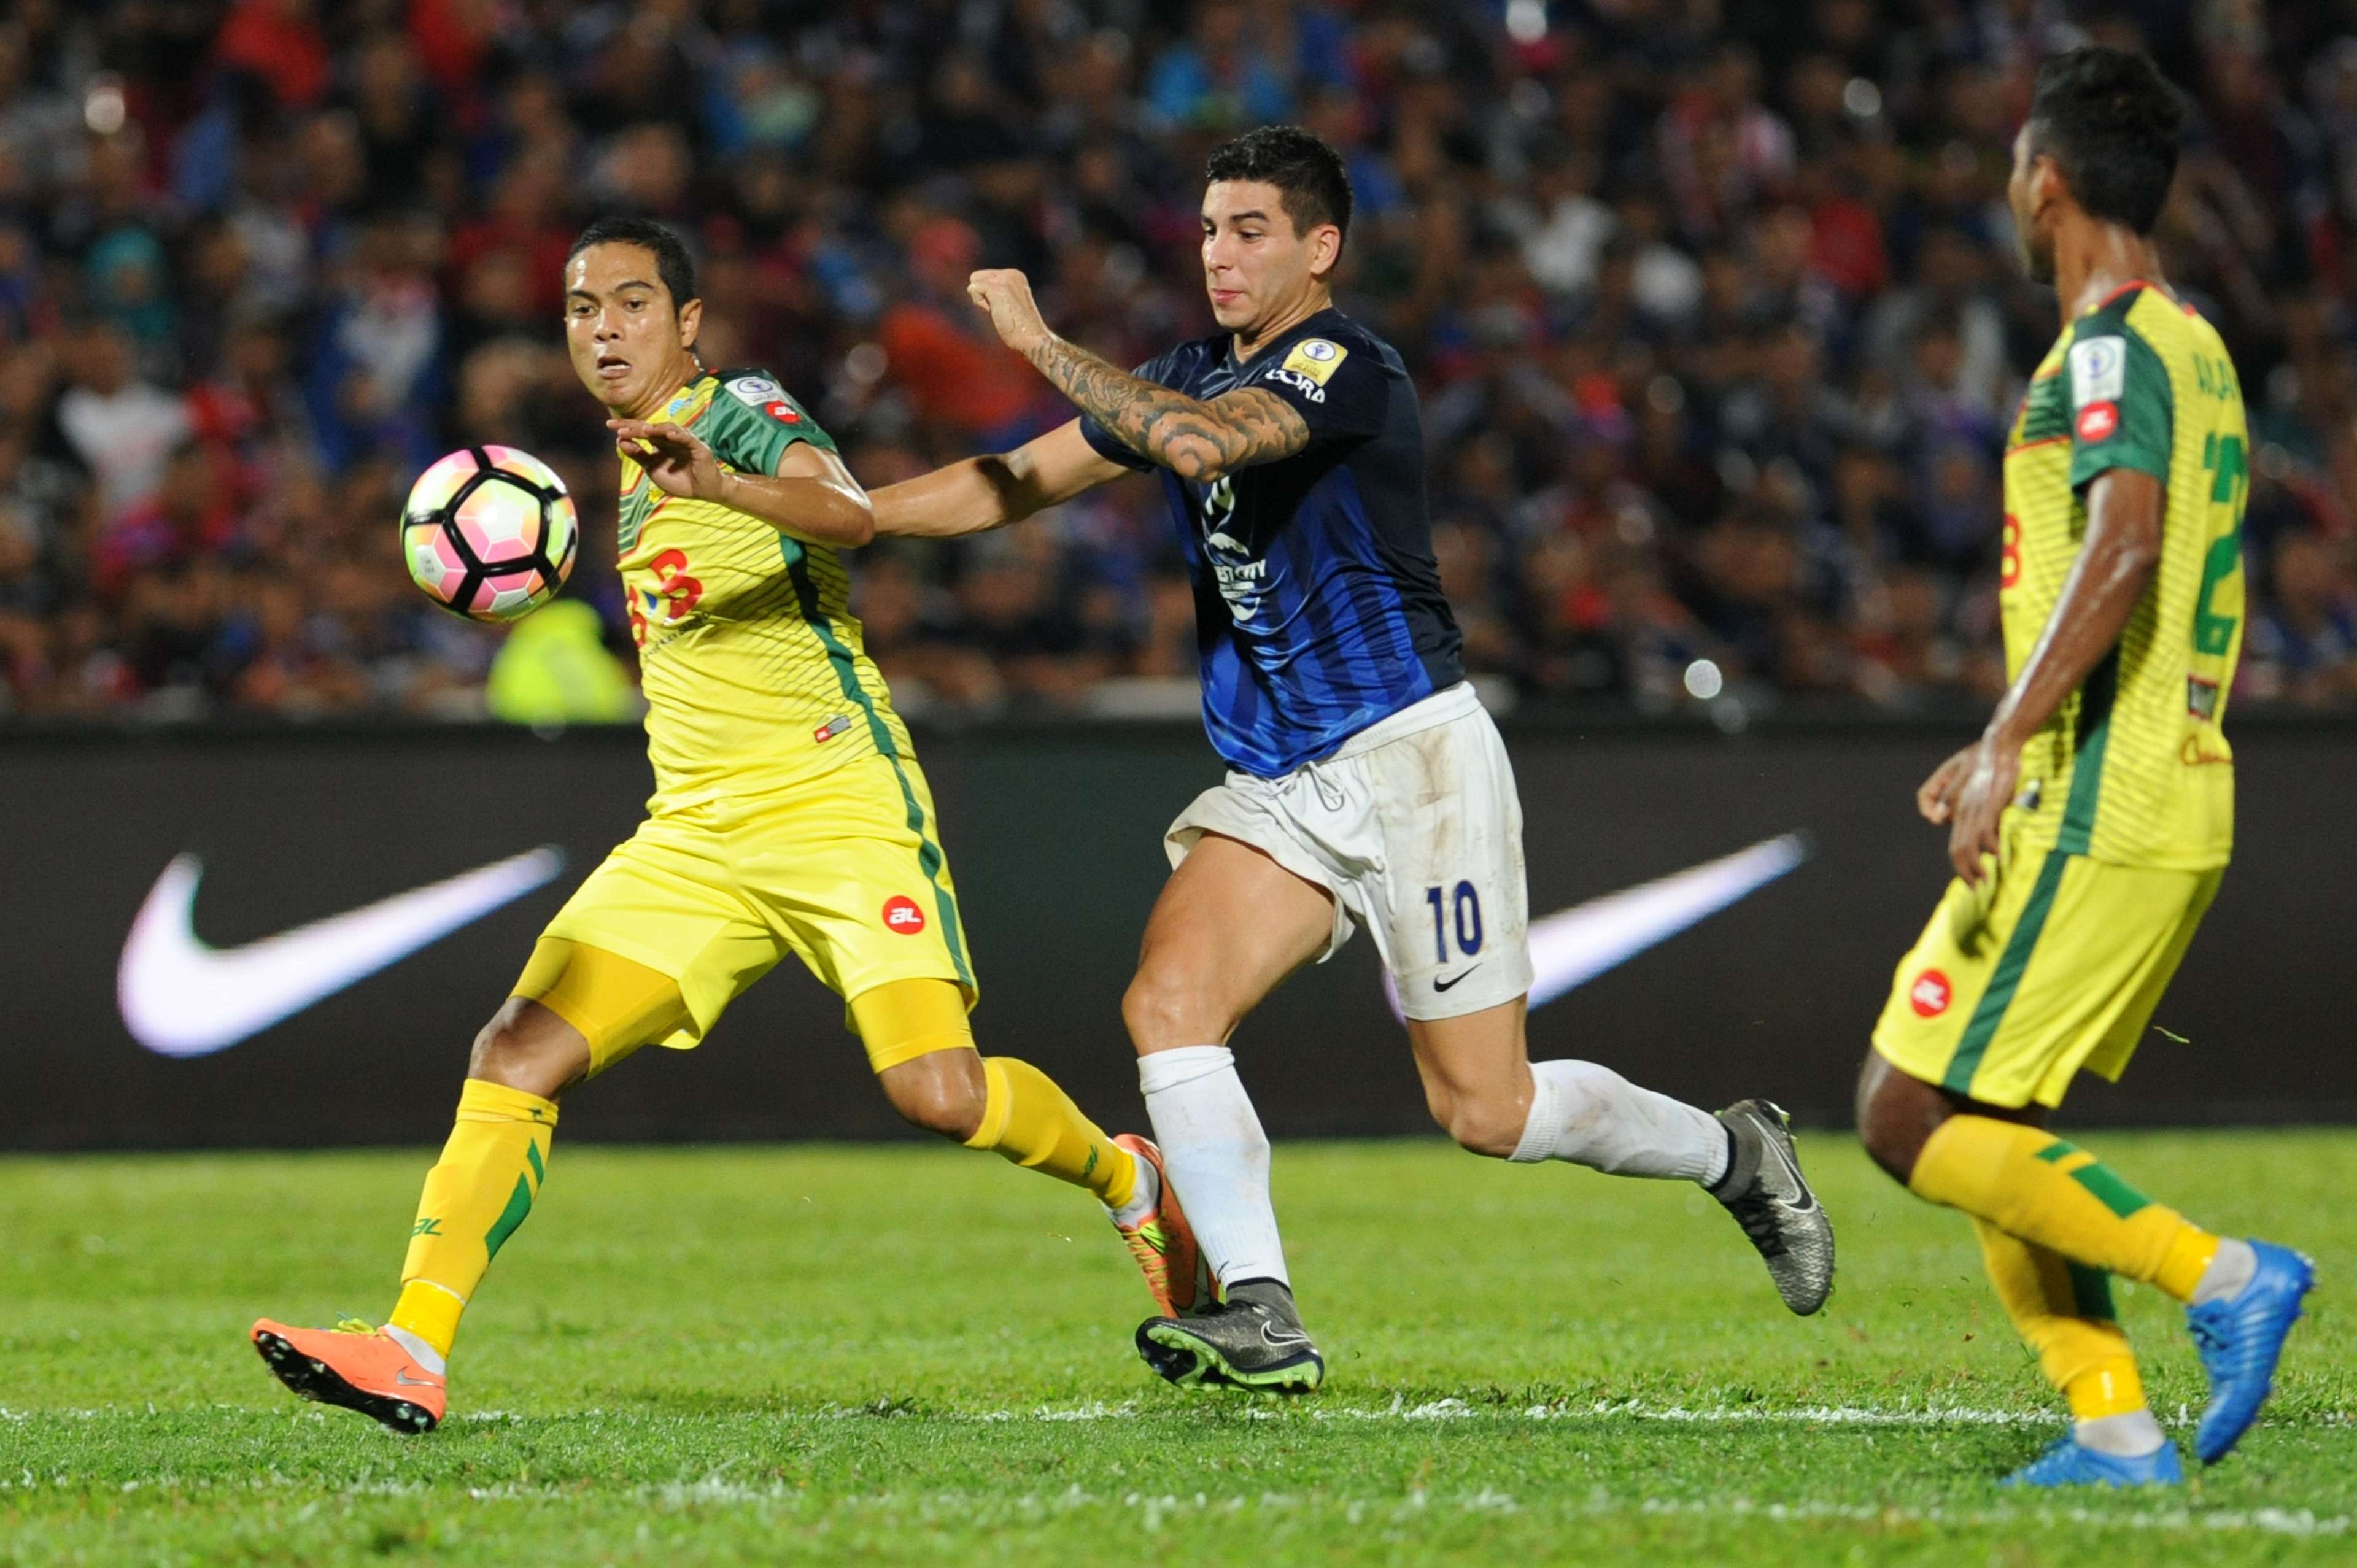 Johor Darul Ta'zim's Brian Ferreira (middle) vies for the ball with Kedah's Fitri Omar (left) 20/1/2017